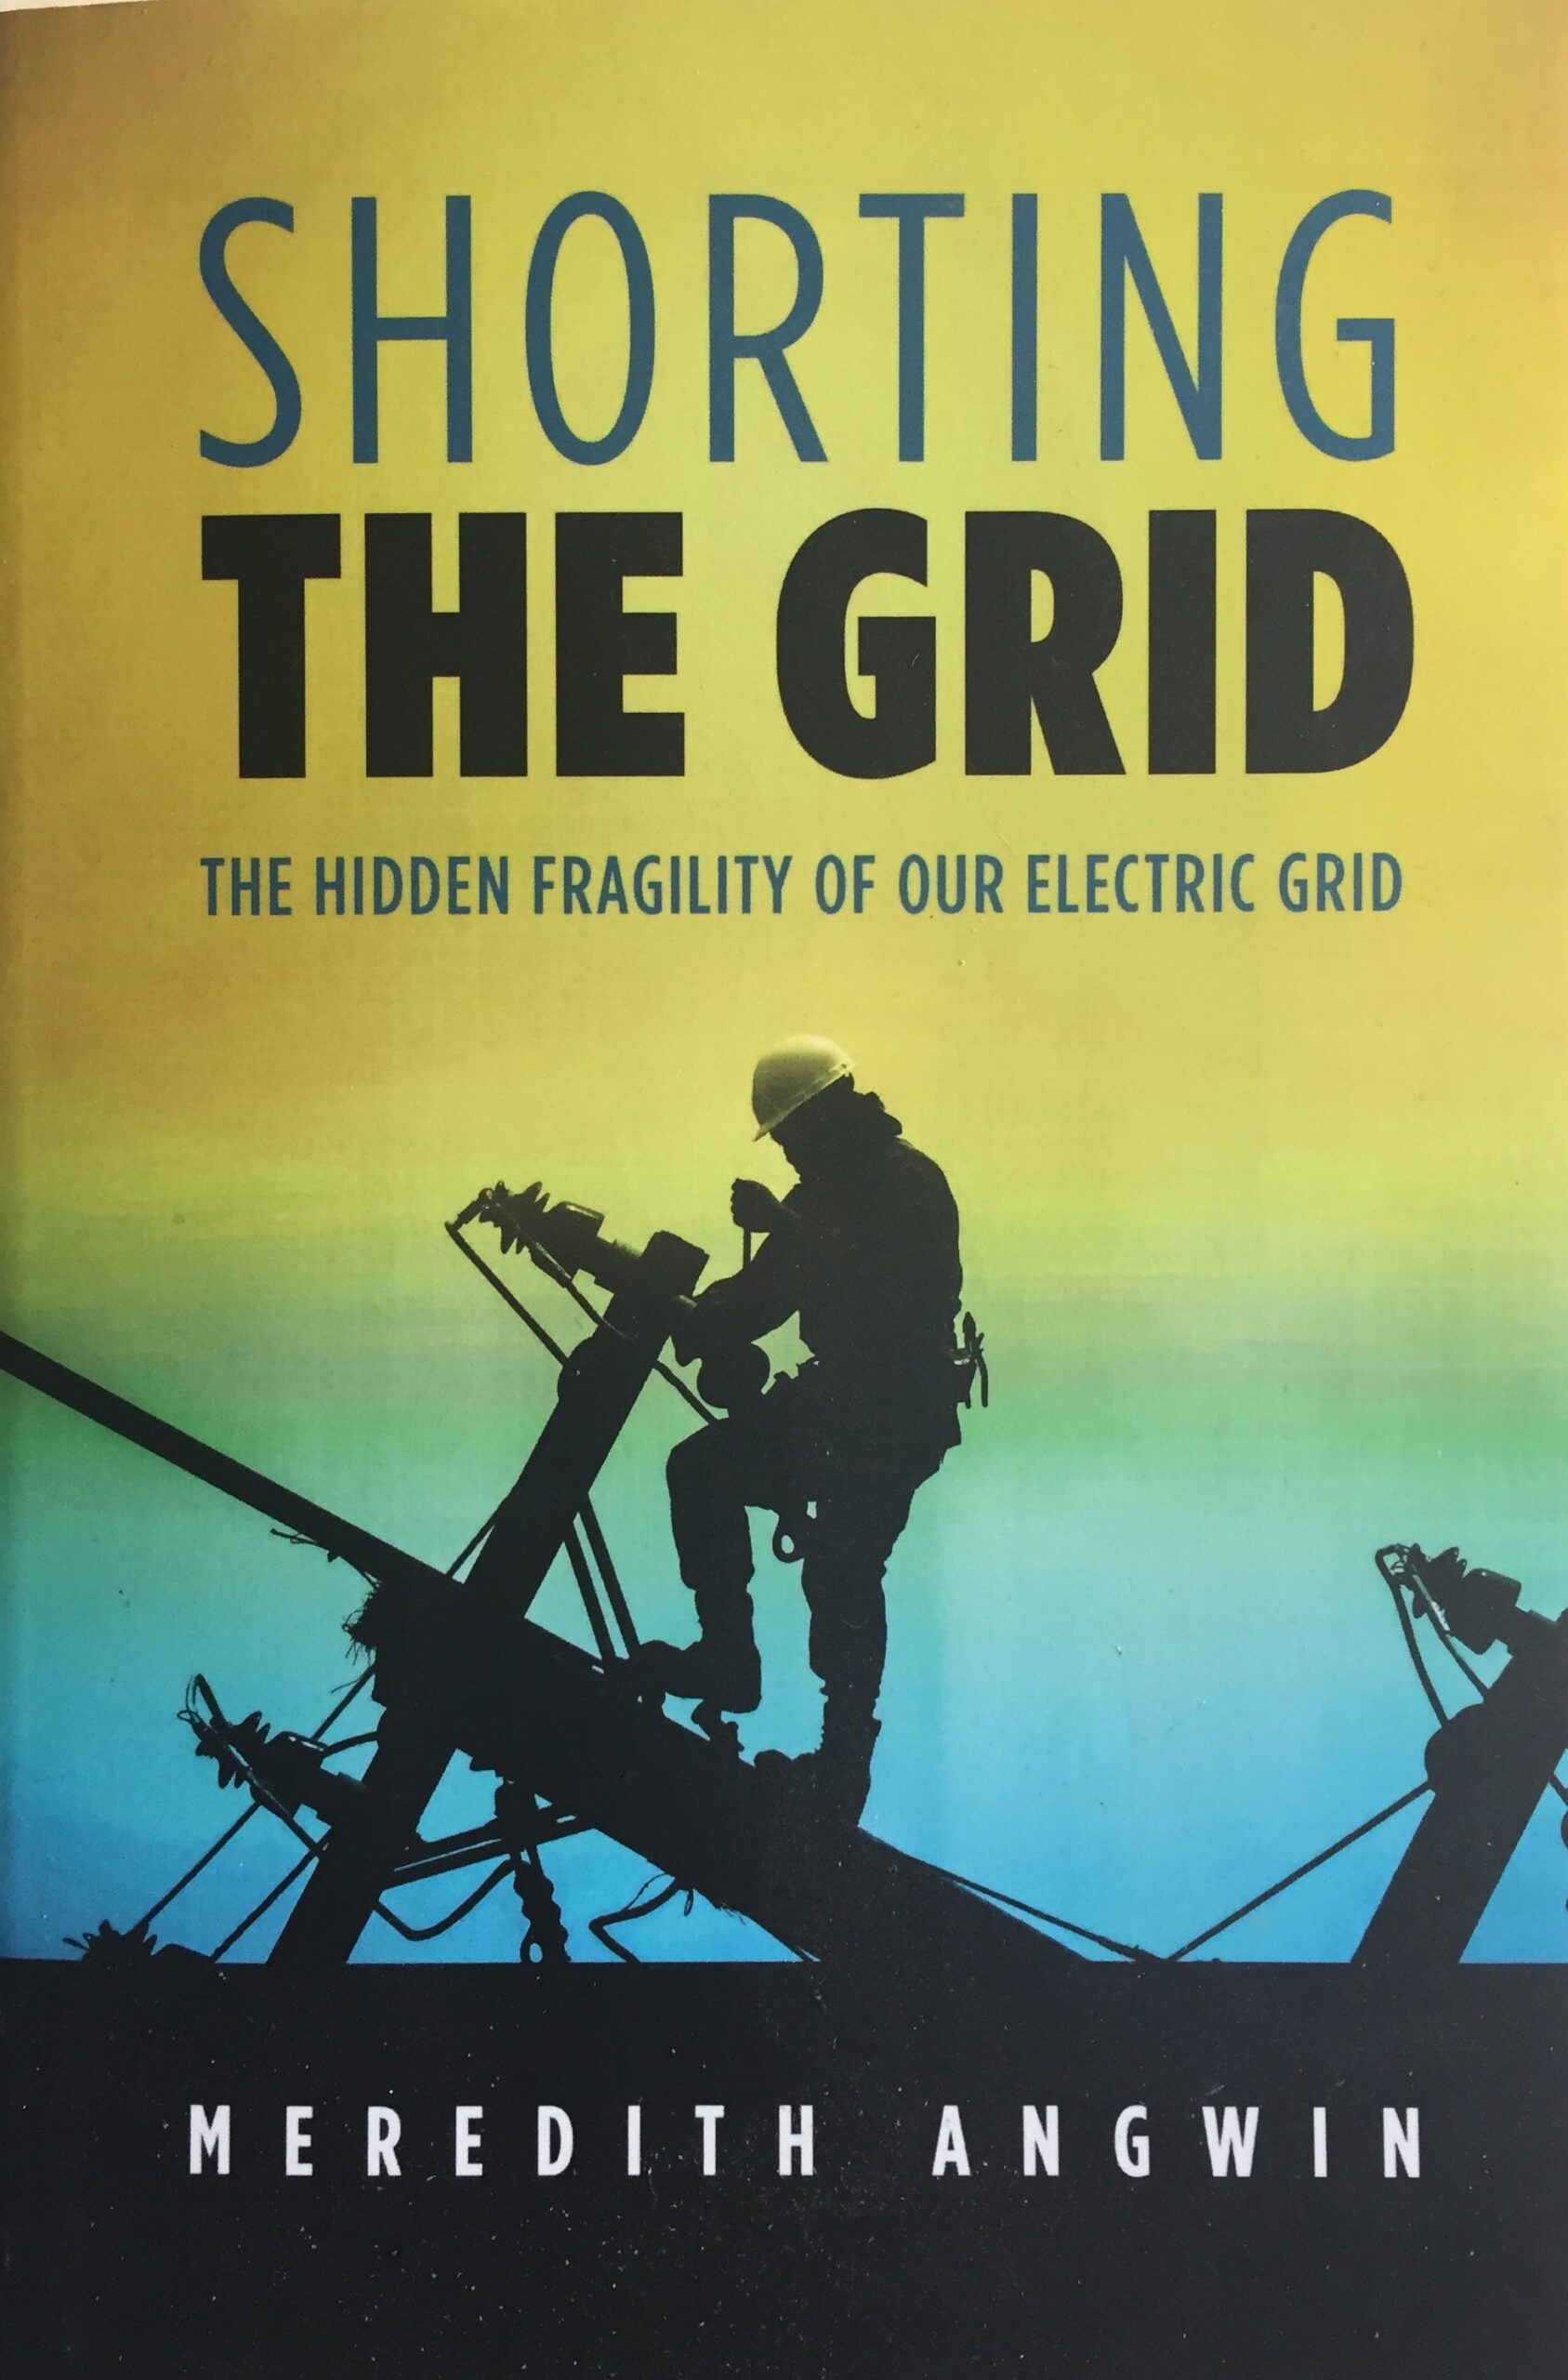 Shorting the Grid